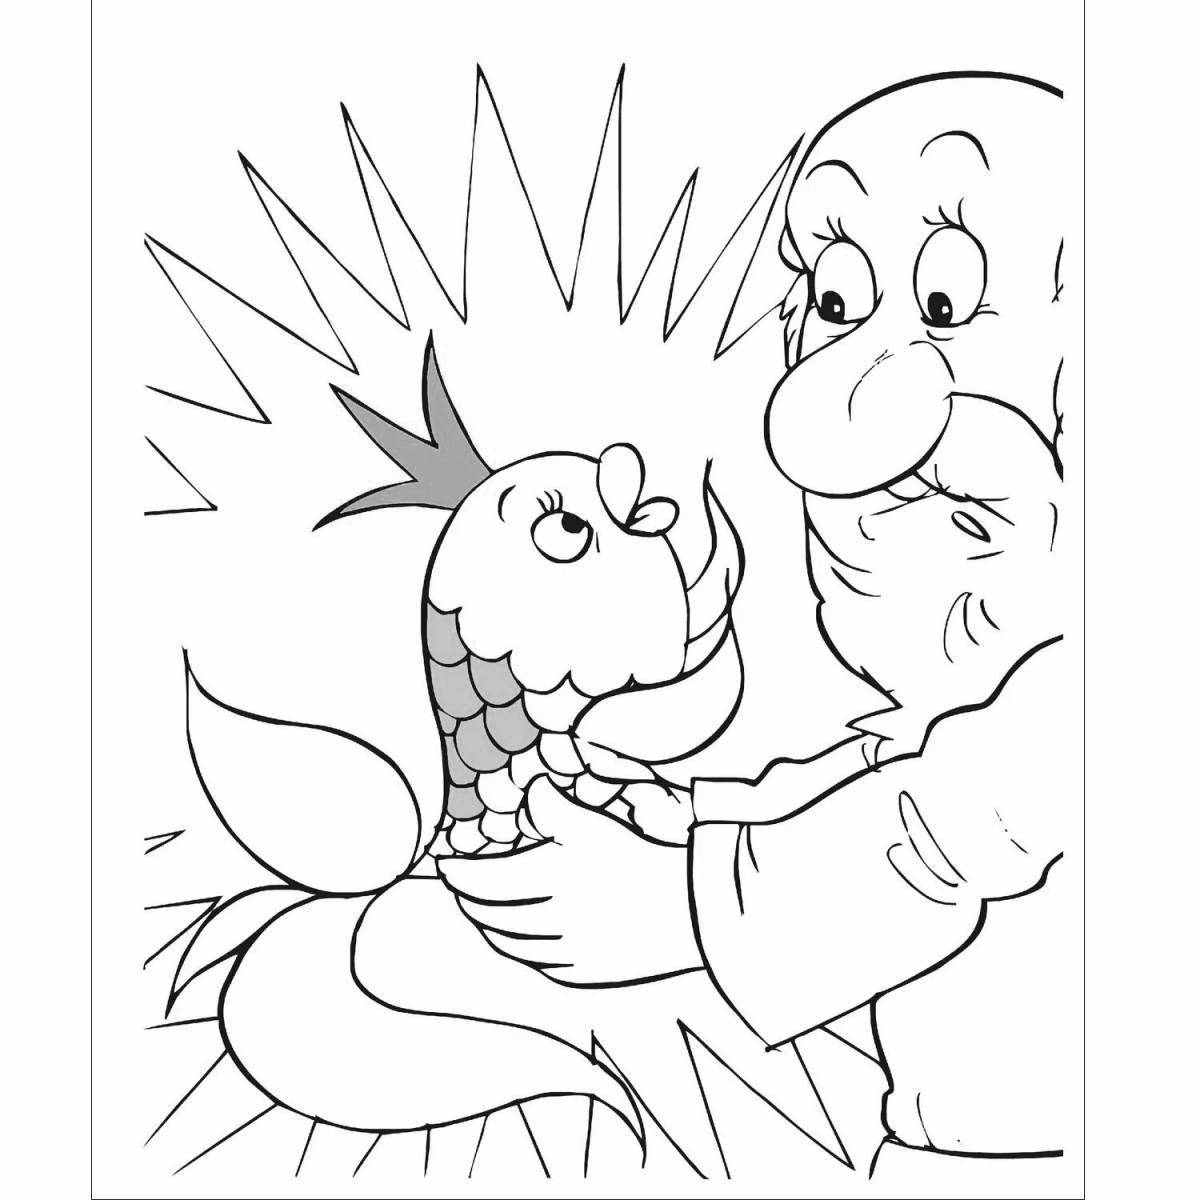 Magic coloring book for the tale of the fisherman and the fish